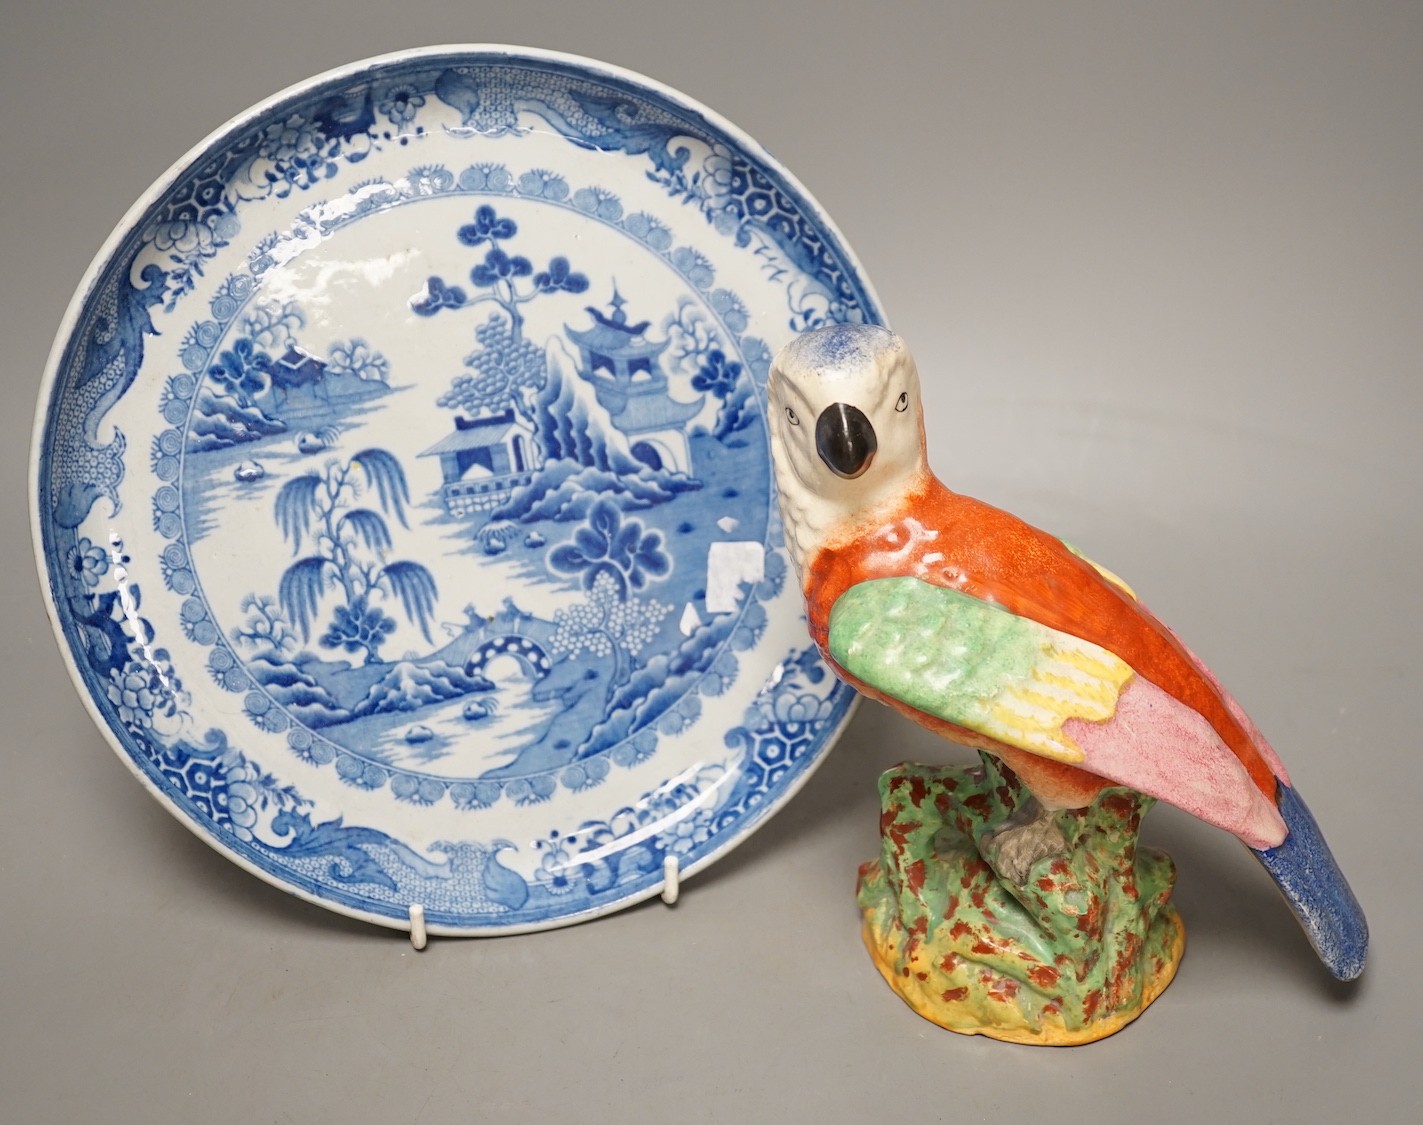 A Staffordshire pottery figure of a parrot, 19.5cm tall, together with a blue and white dish